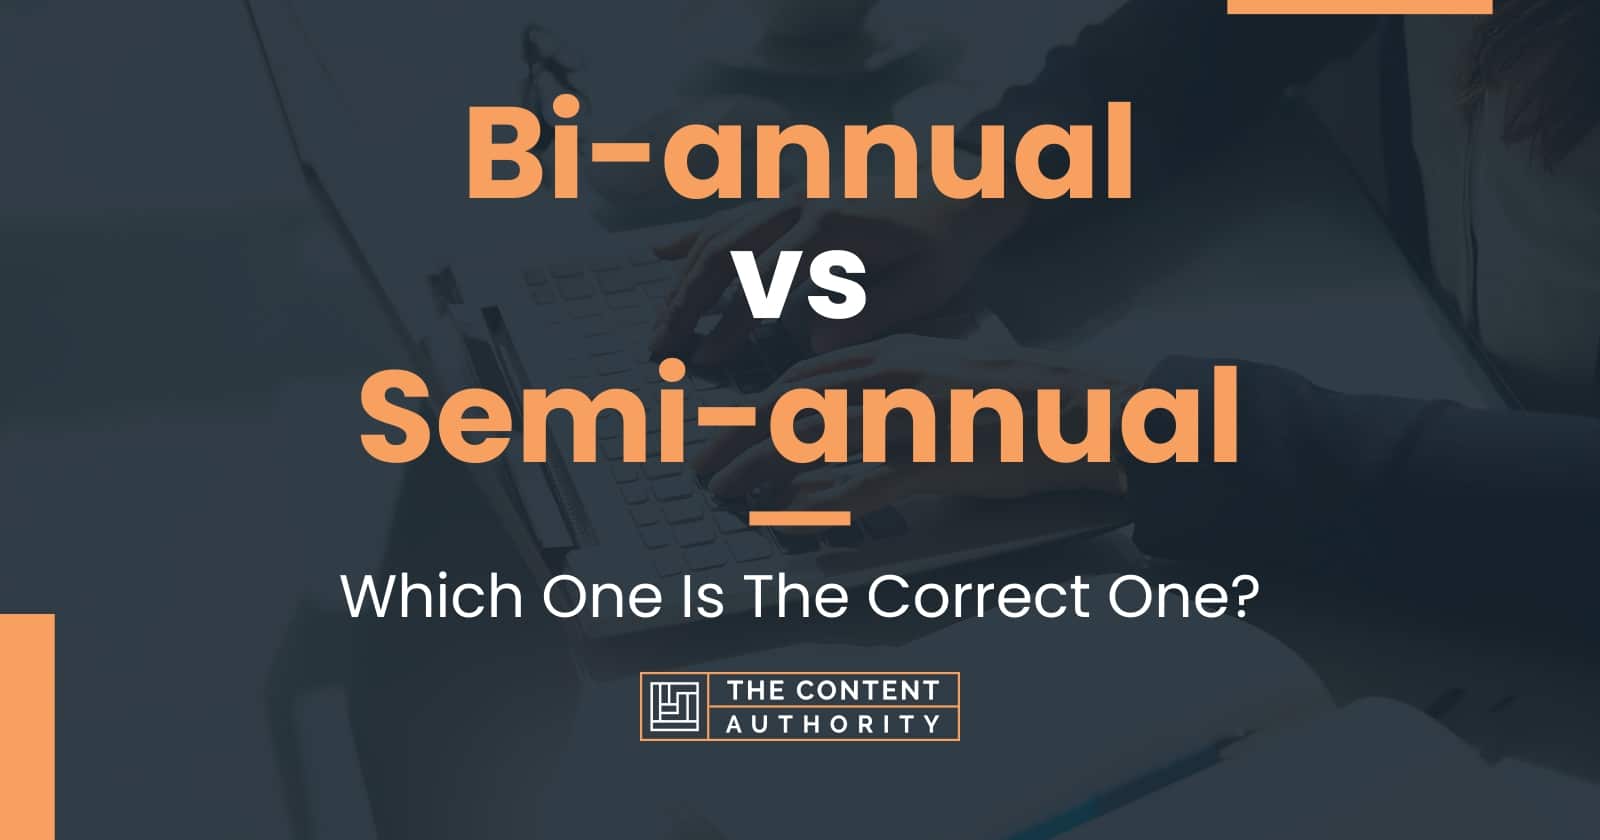 Biannual vs Semiannual Which One Is The Correct One?